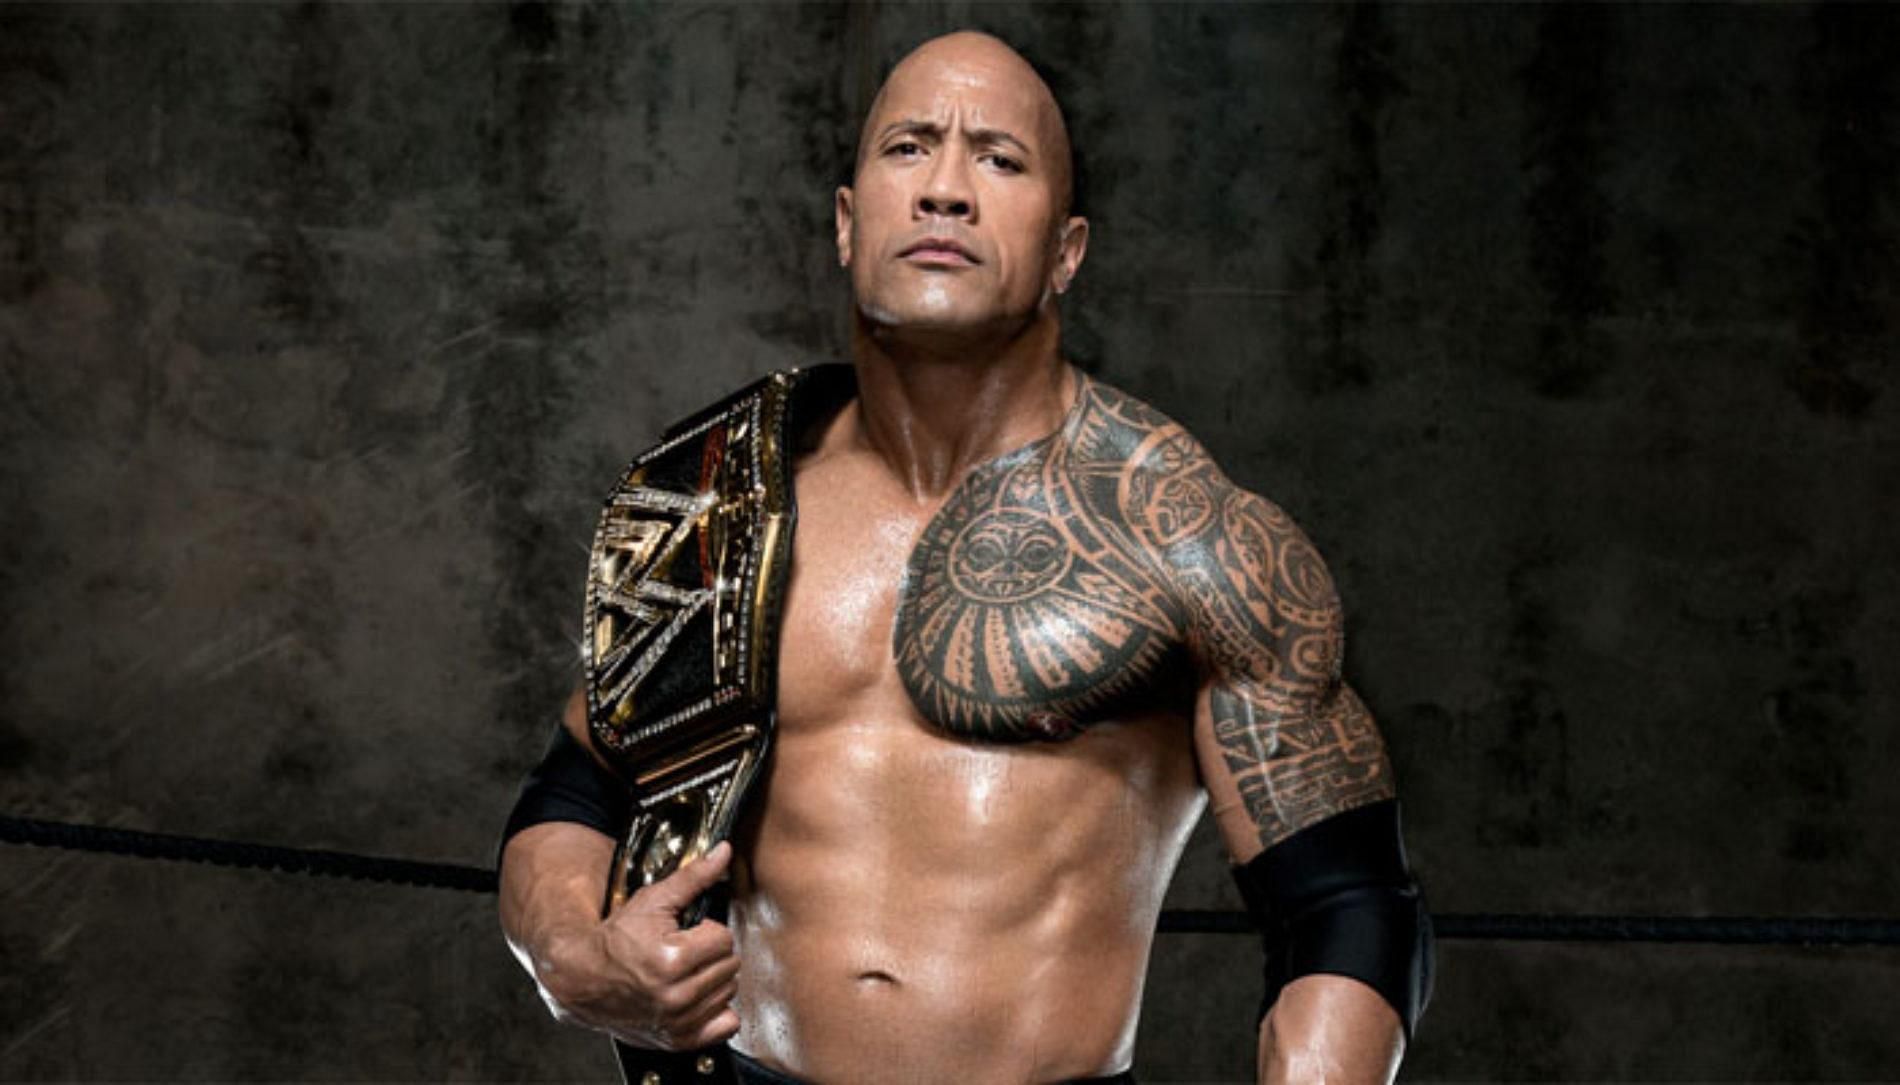 The People&#039;s Champion, Rock had won the WWE Championship by defeating CM Punk at Royal Rumble 2013